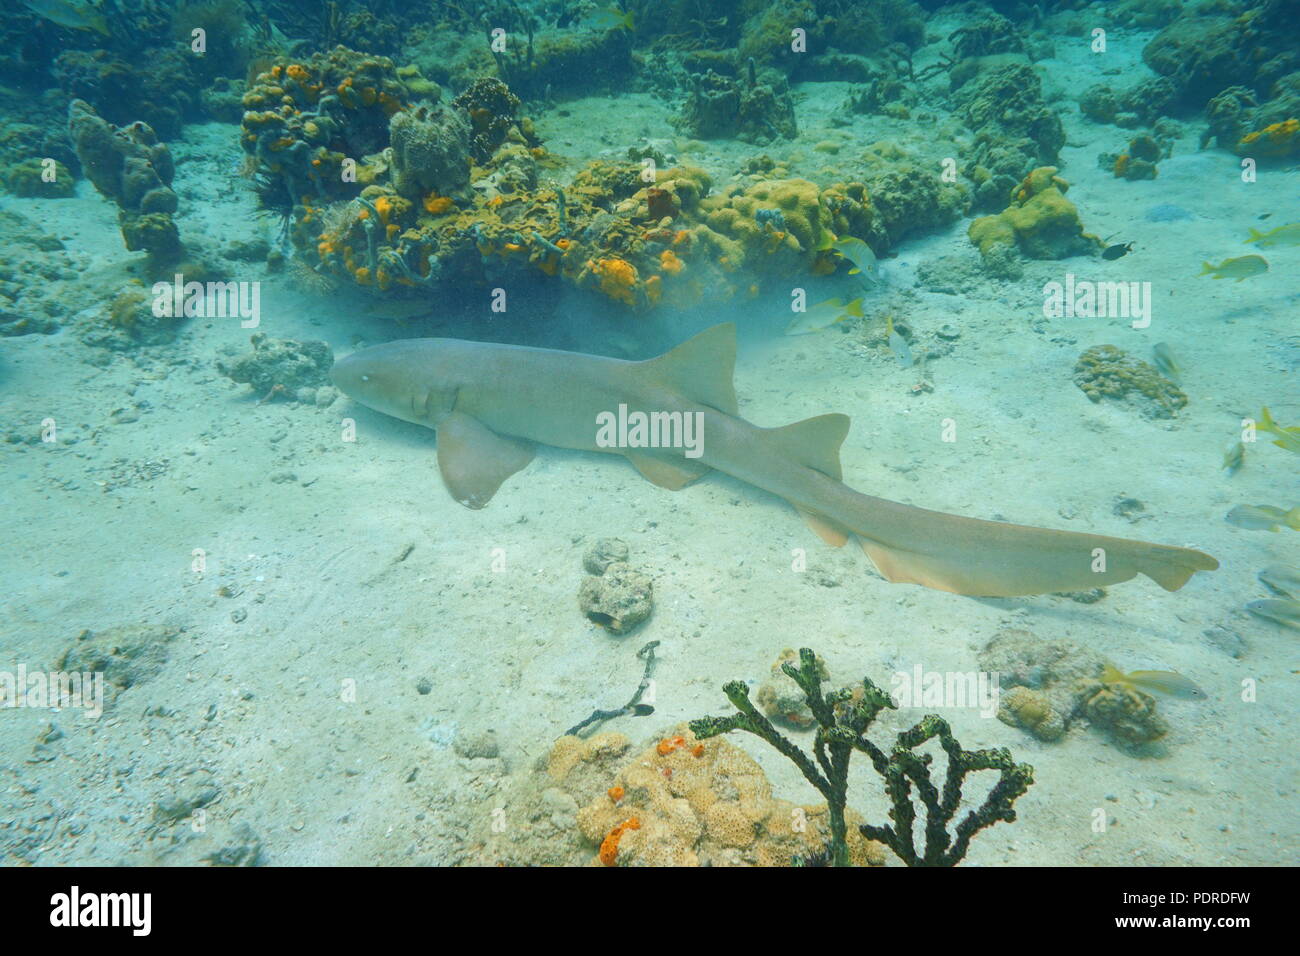 Nurse shark, Ginglymostoma cirratum, underwater on the seabed in the Caribbean sea, Mexico Stock Photo